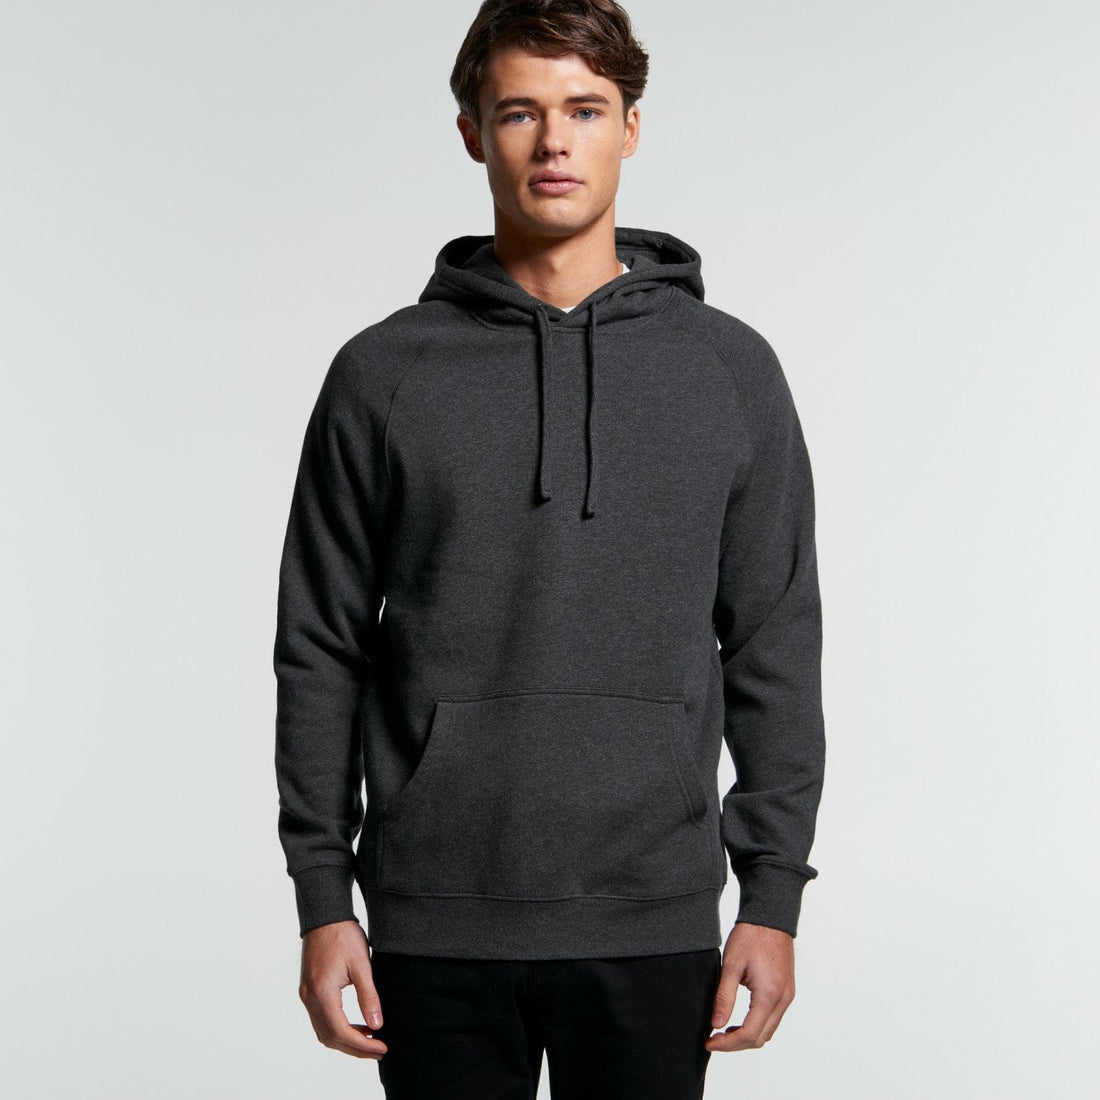 AS Colour - MENS SUPPLY HOOD - 5101 - WEARhouse